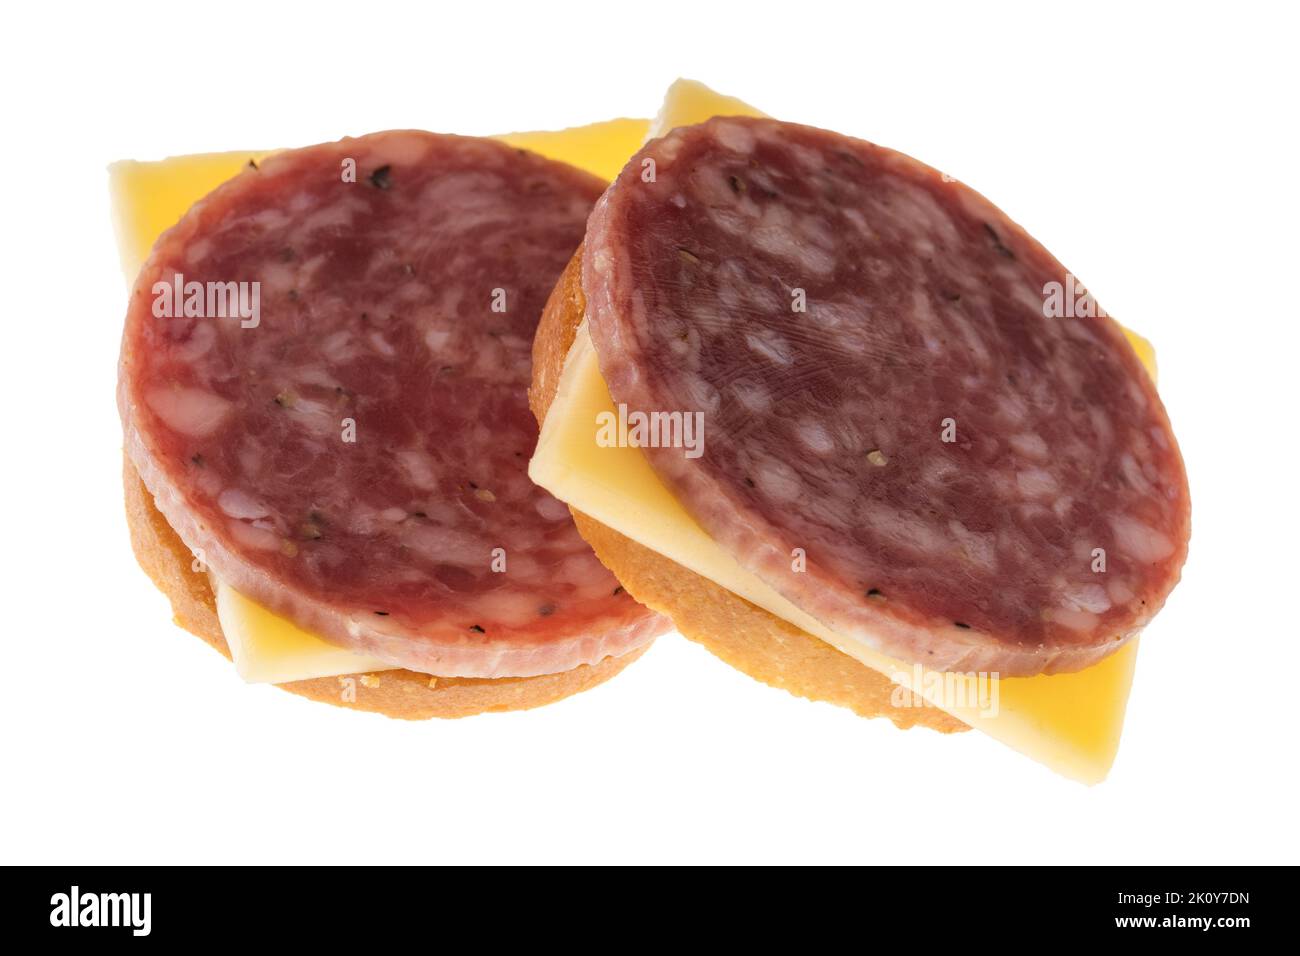 Side view of two snack crackers with dry salami and gouda cheese isolated on a white background. Stock Photo